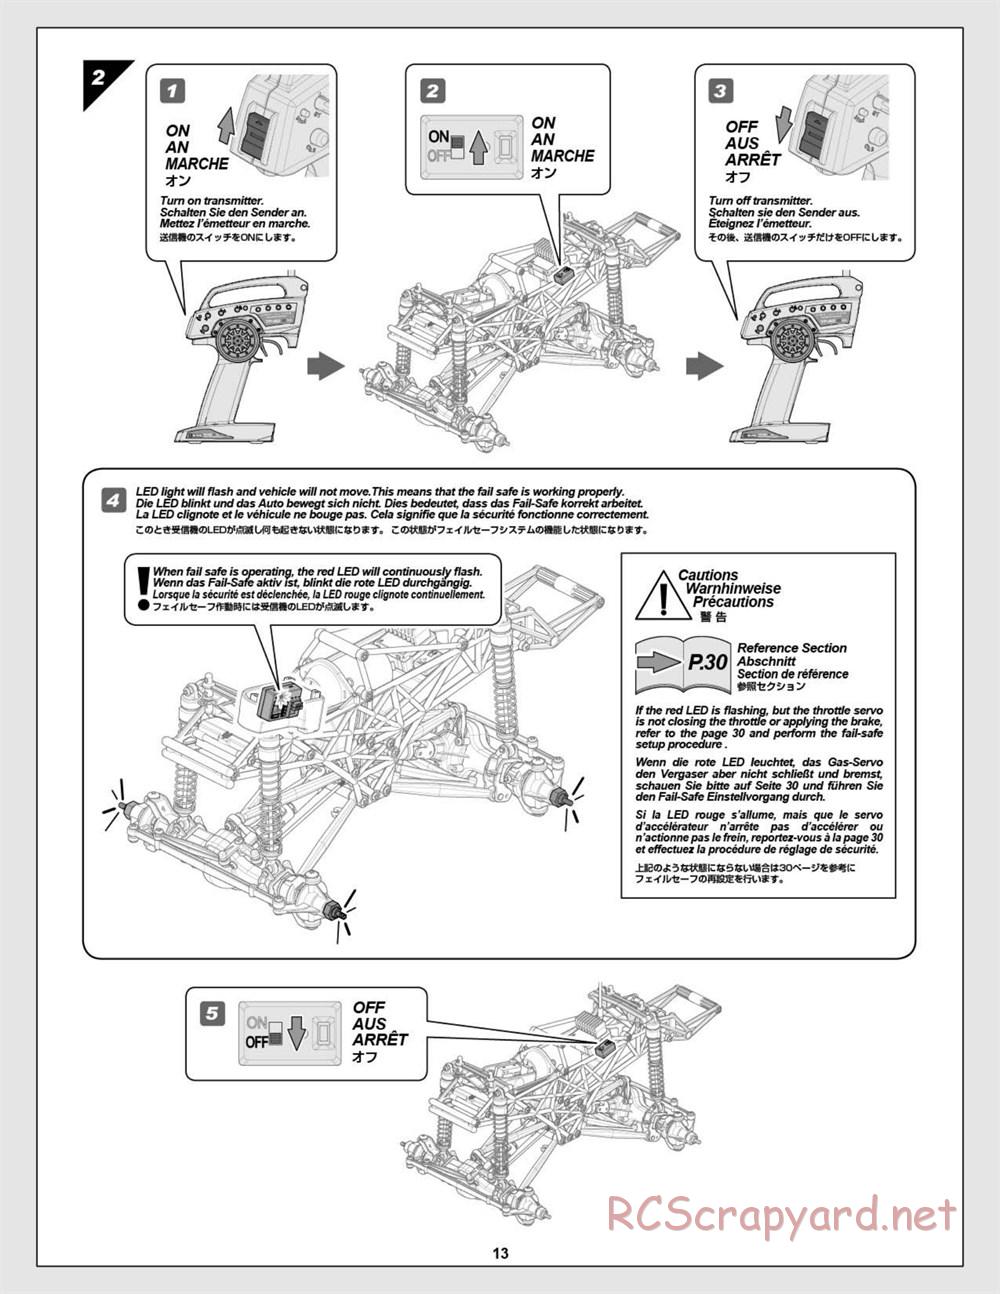 HPI - Wheely King 4x4 - Manual - Page 13